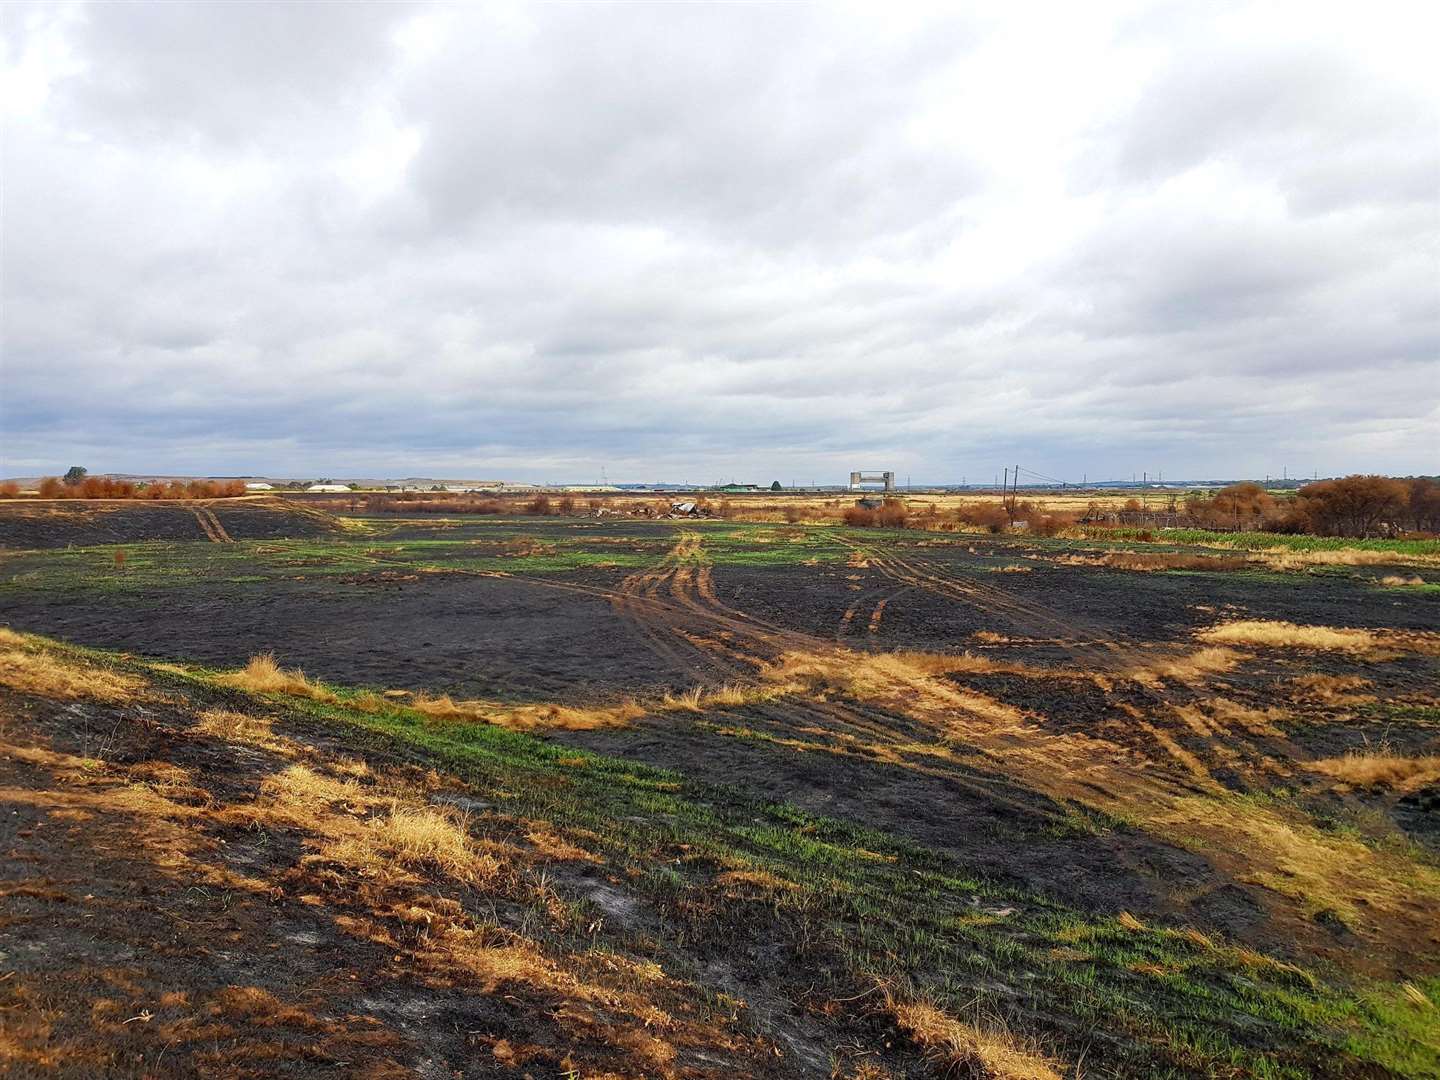 The aftermath of the fire on Dartford Marshes. Images: Matt Thomas